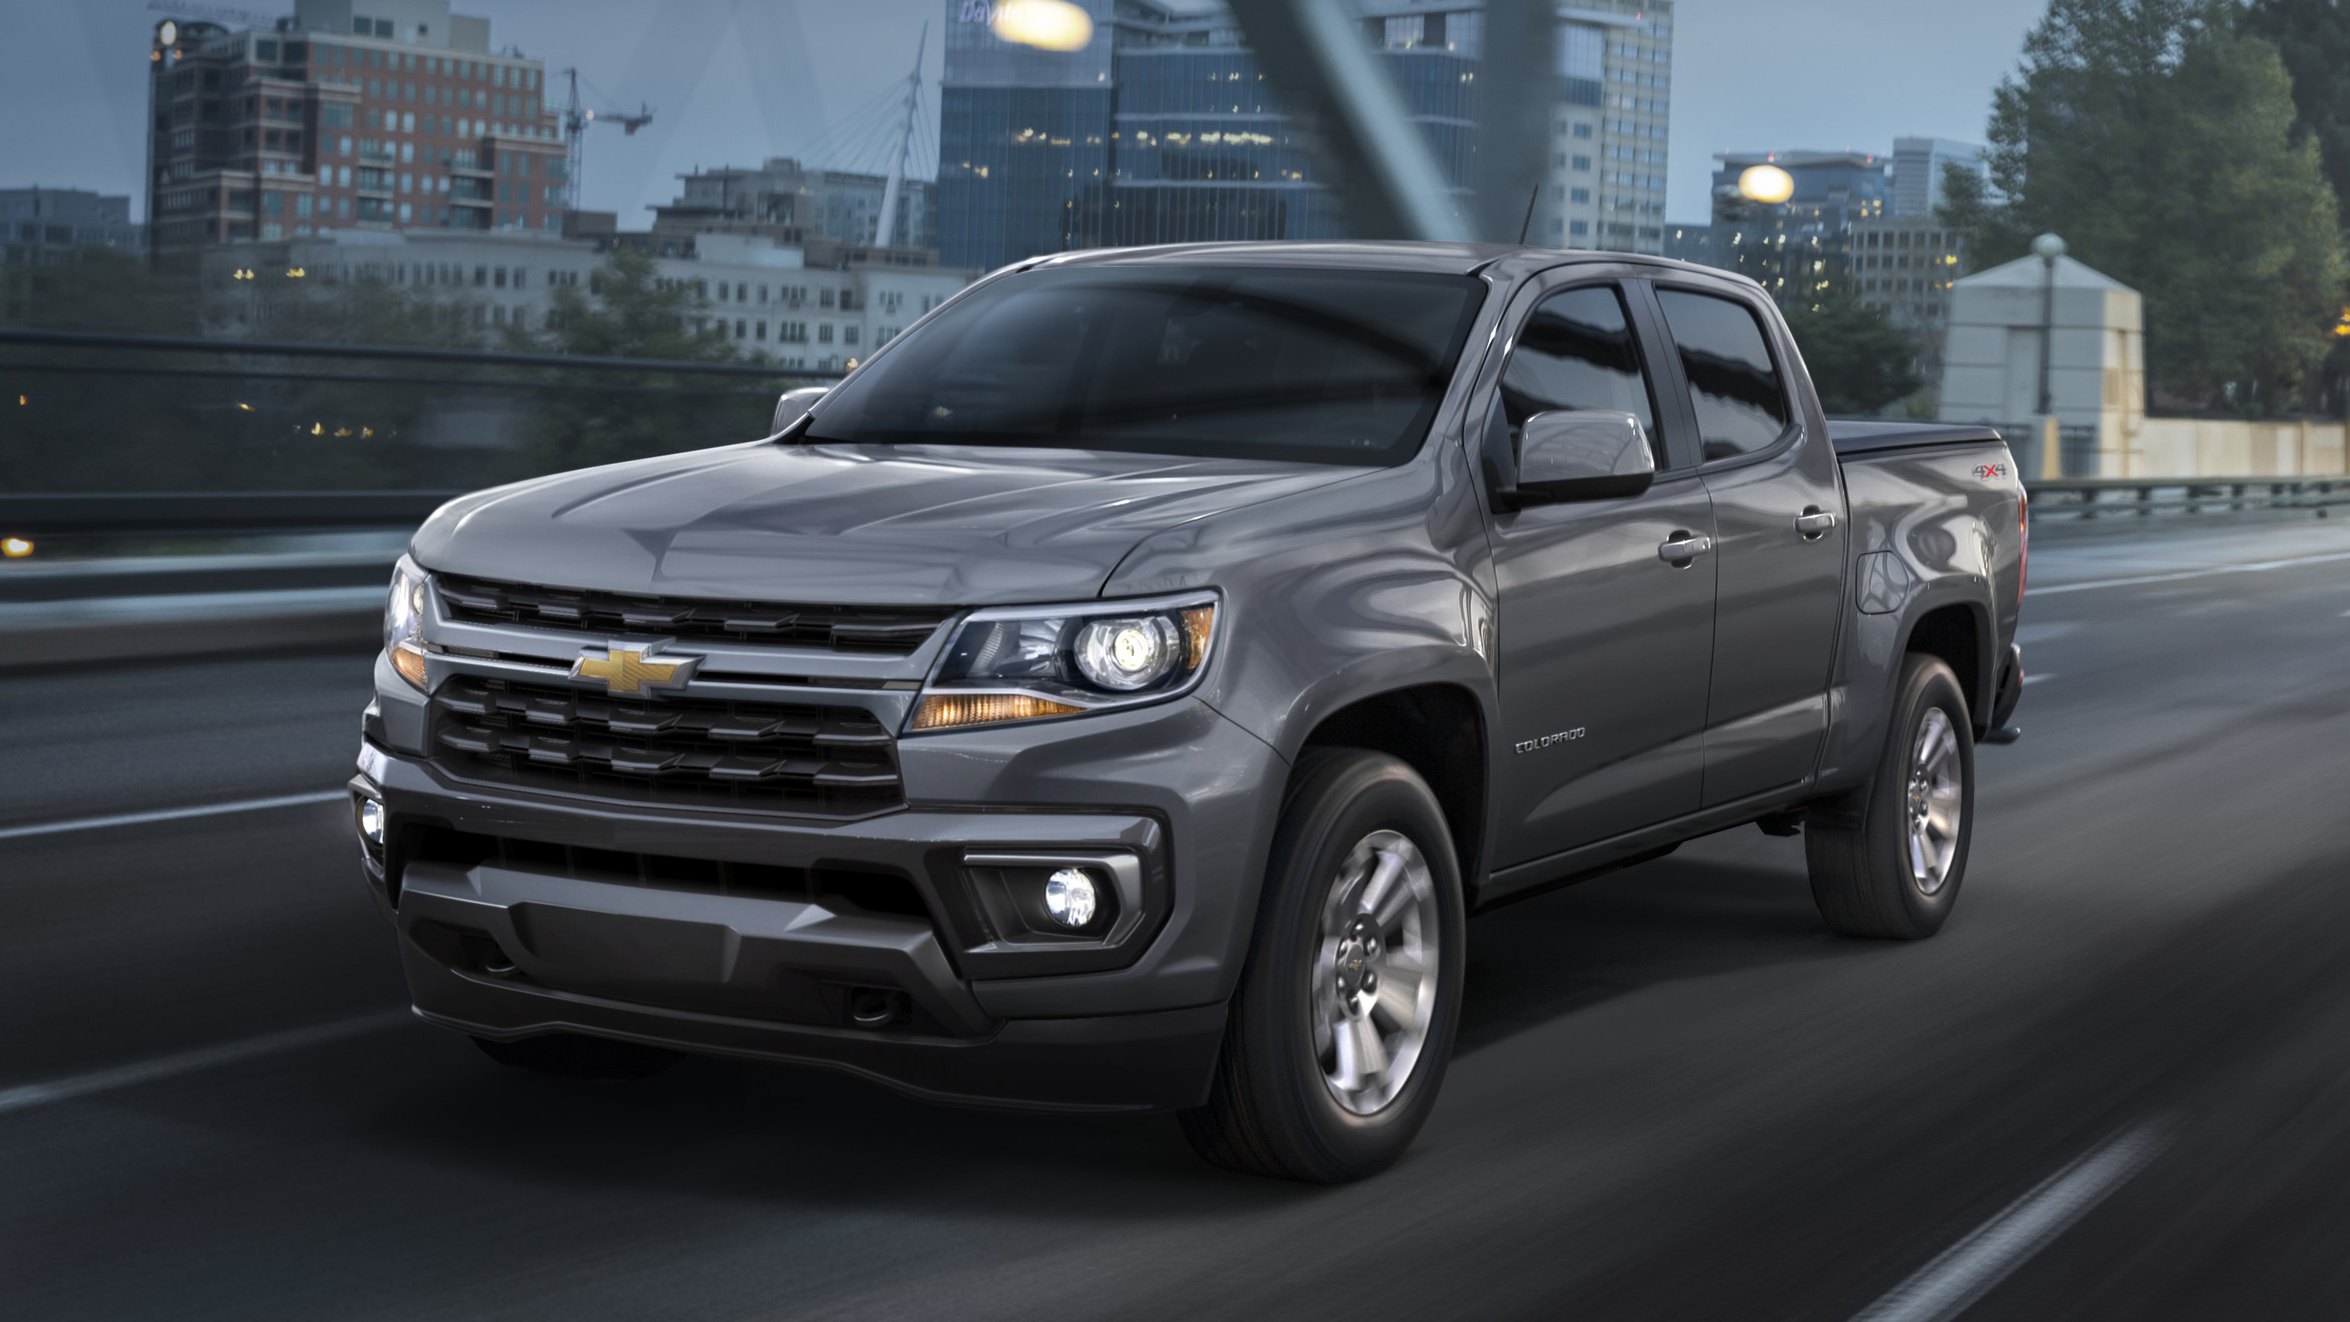 2021 Chevrolet Colorado Revealed In More Basic Lt And Z71 Trims Autoblog